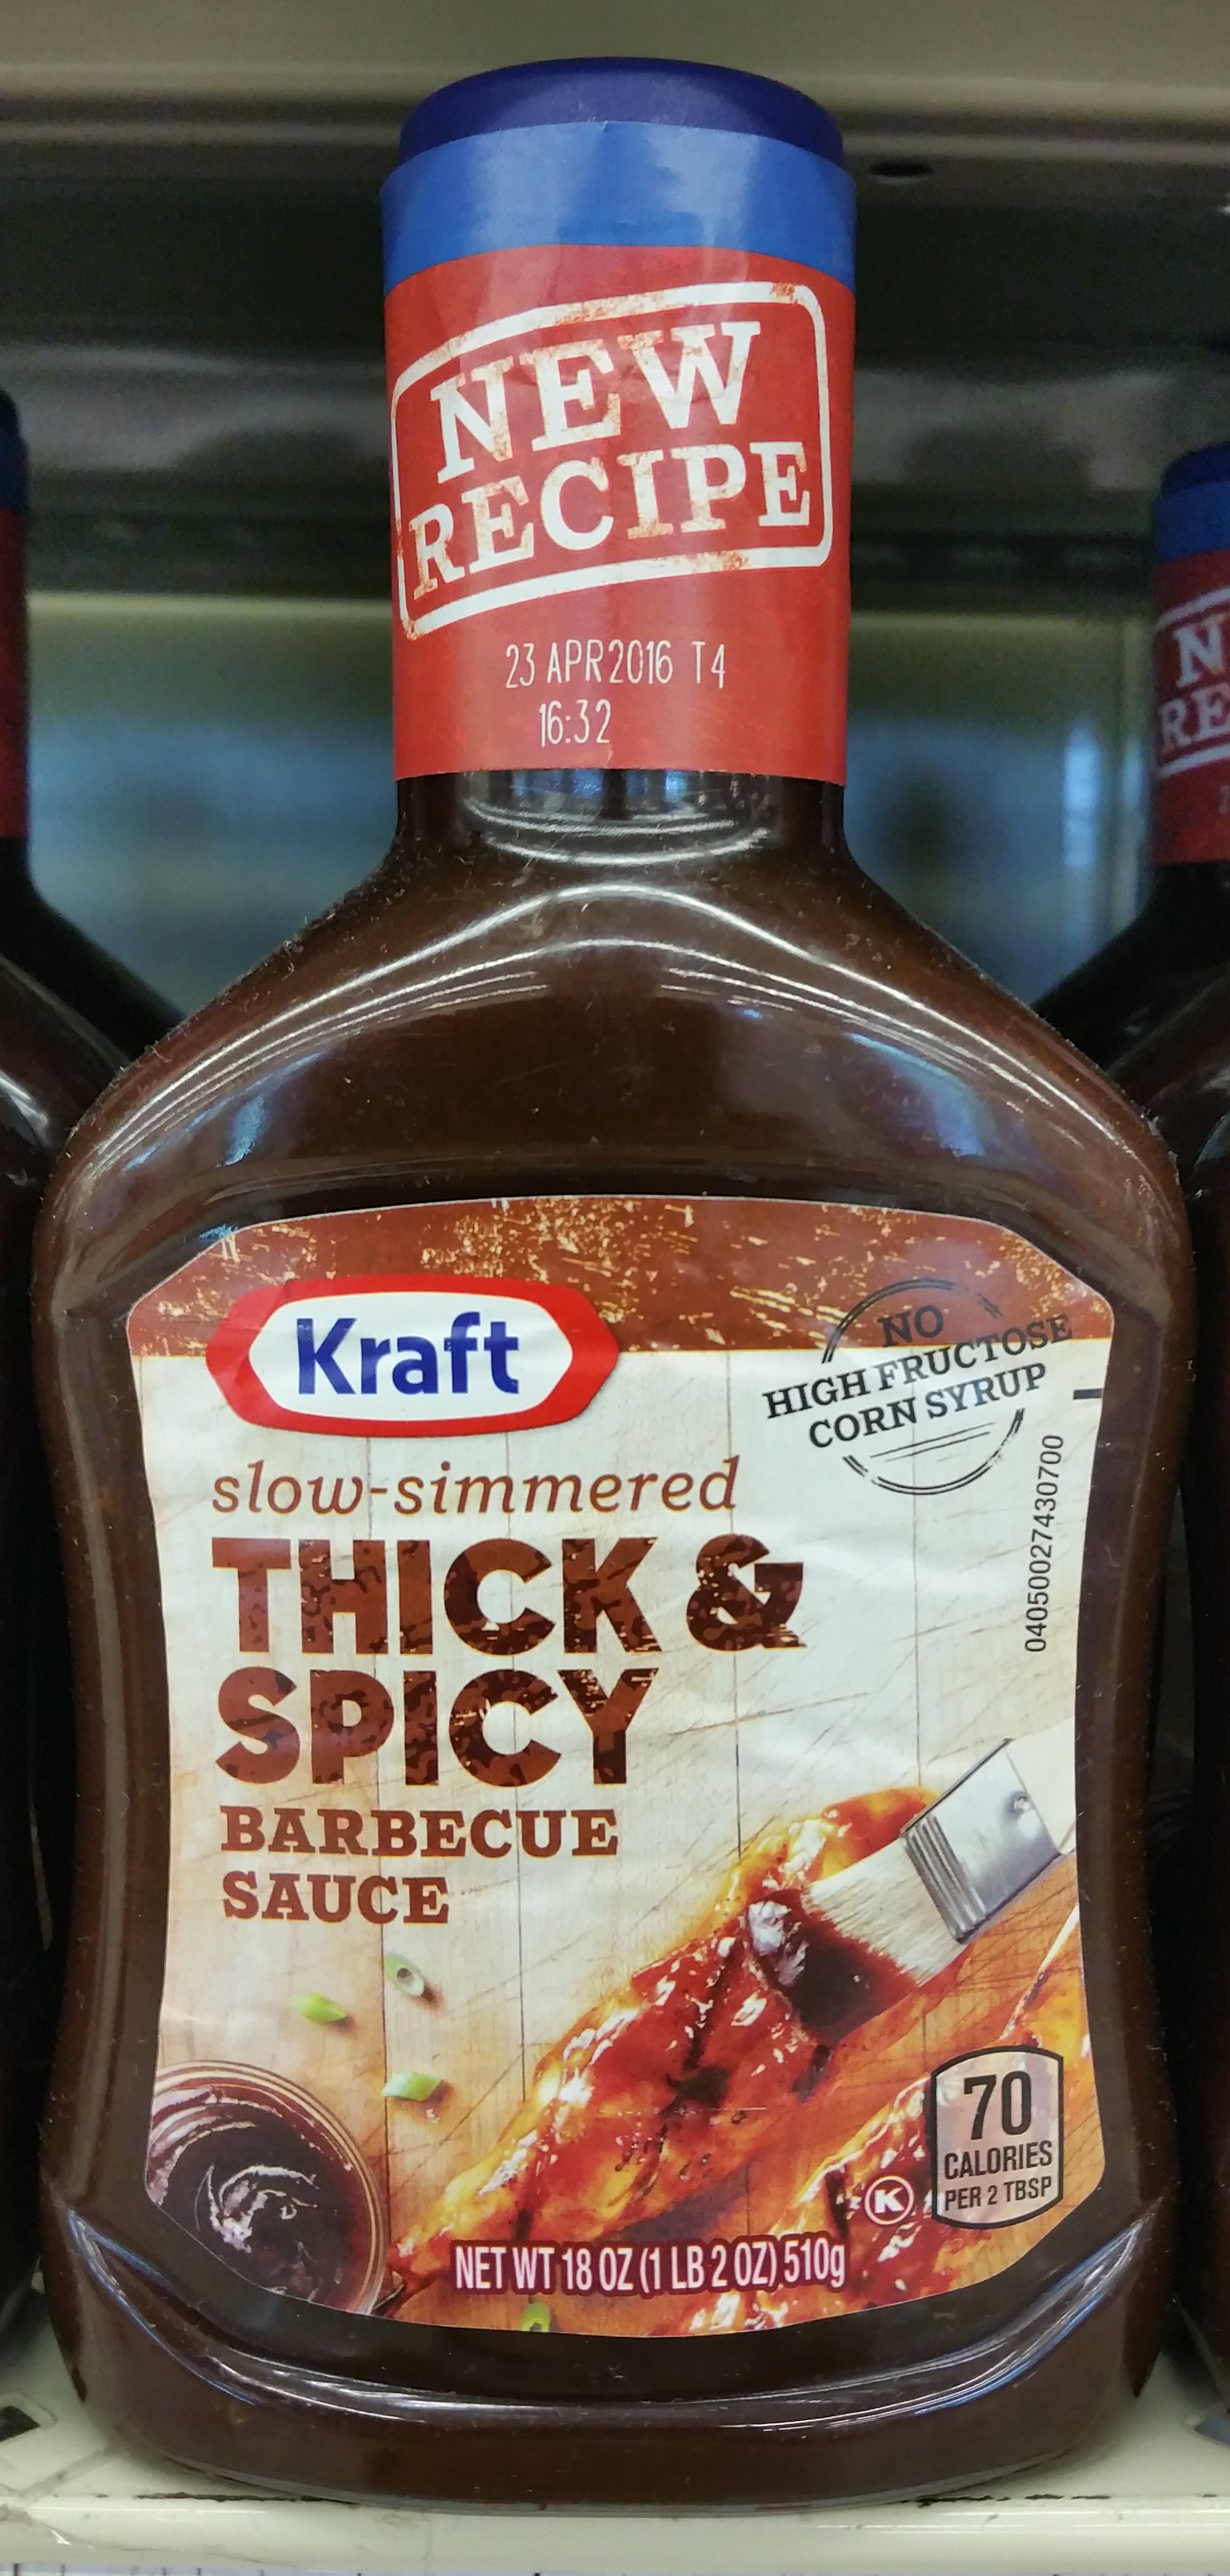 Slow-simmered Thick & Spicy Barbecue Sauce - Product